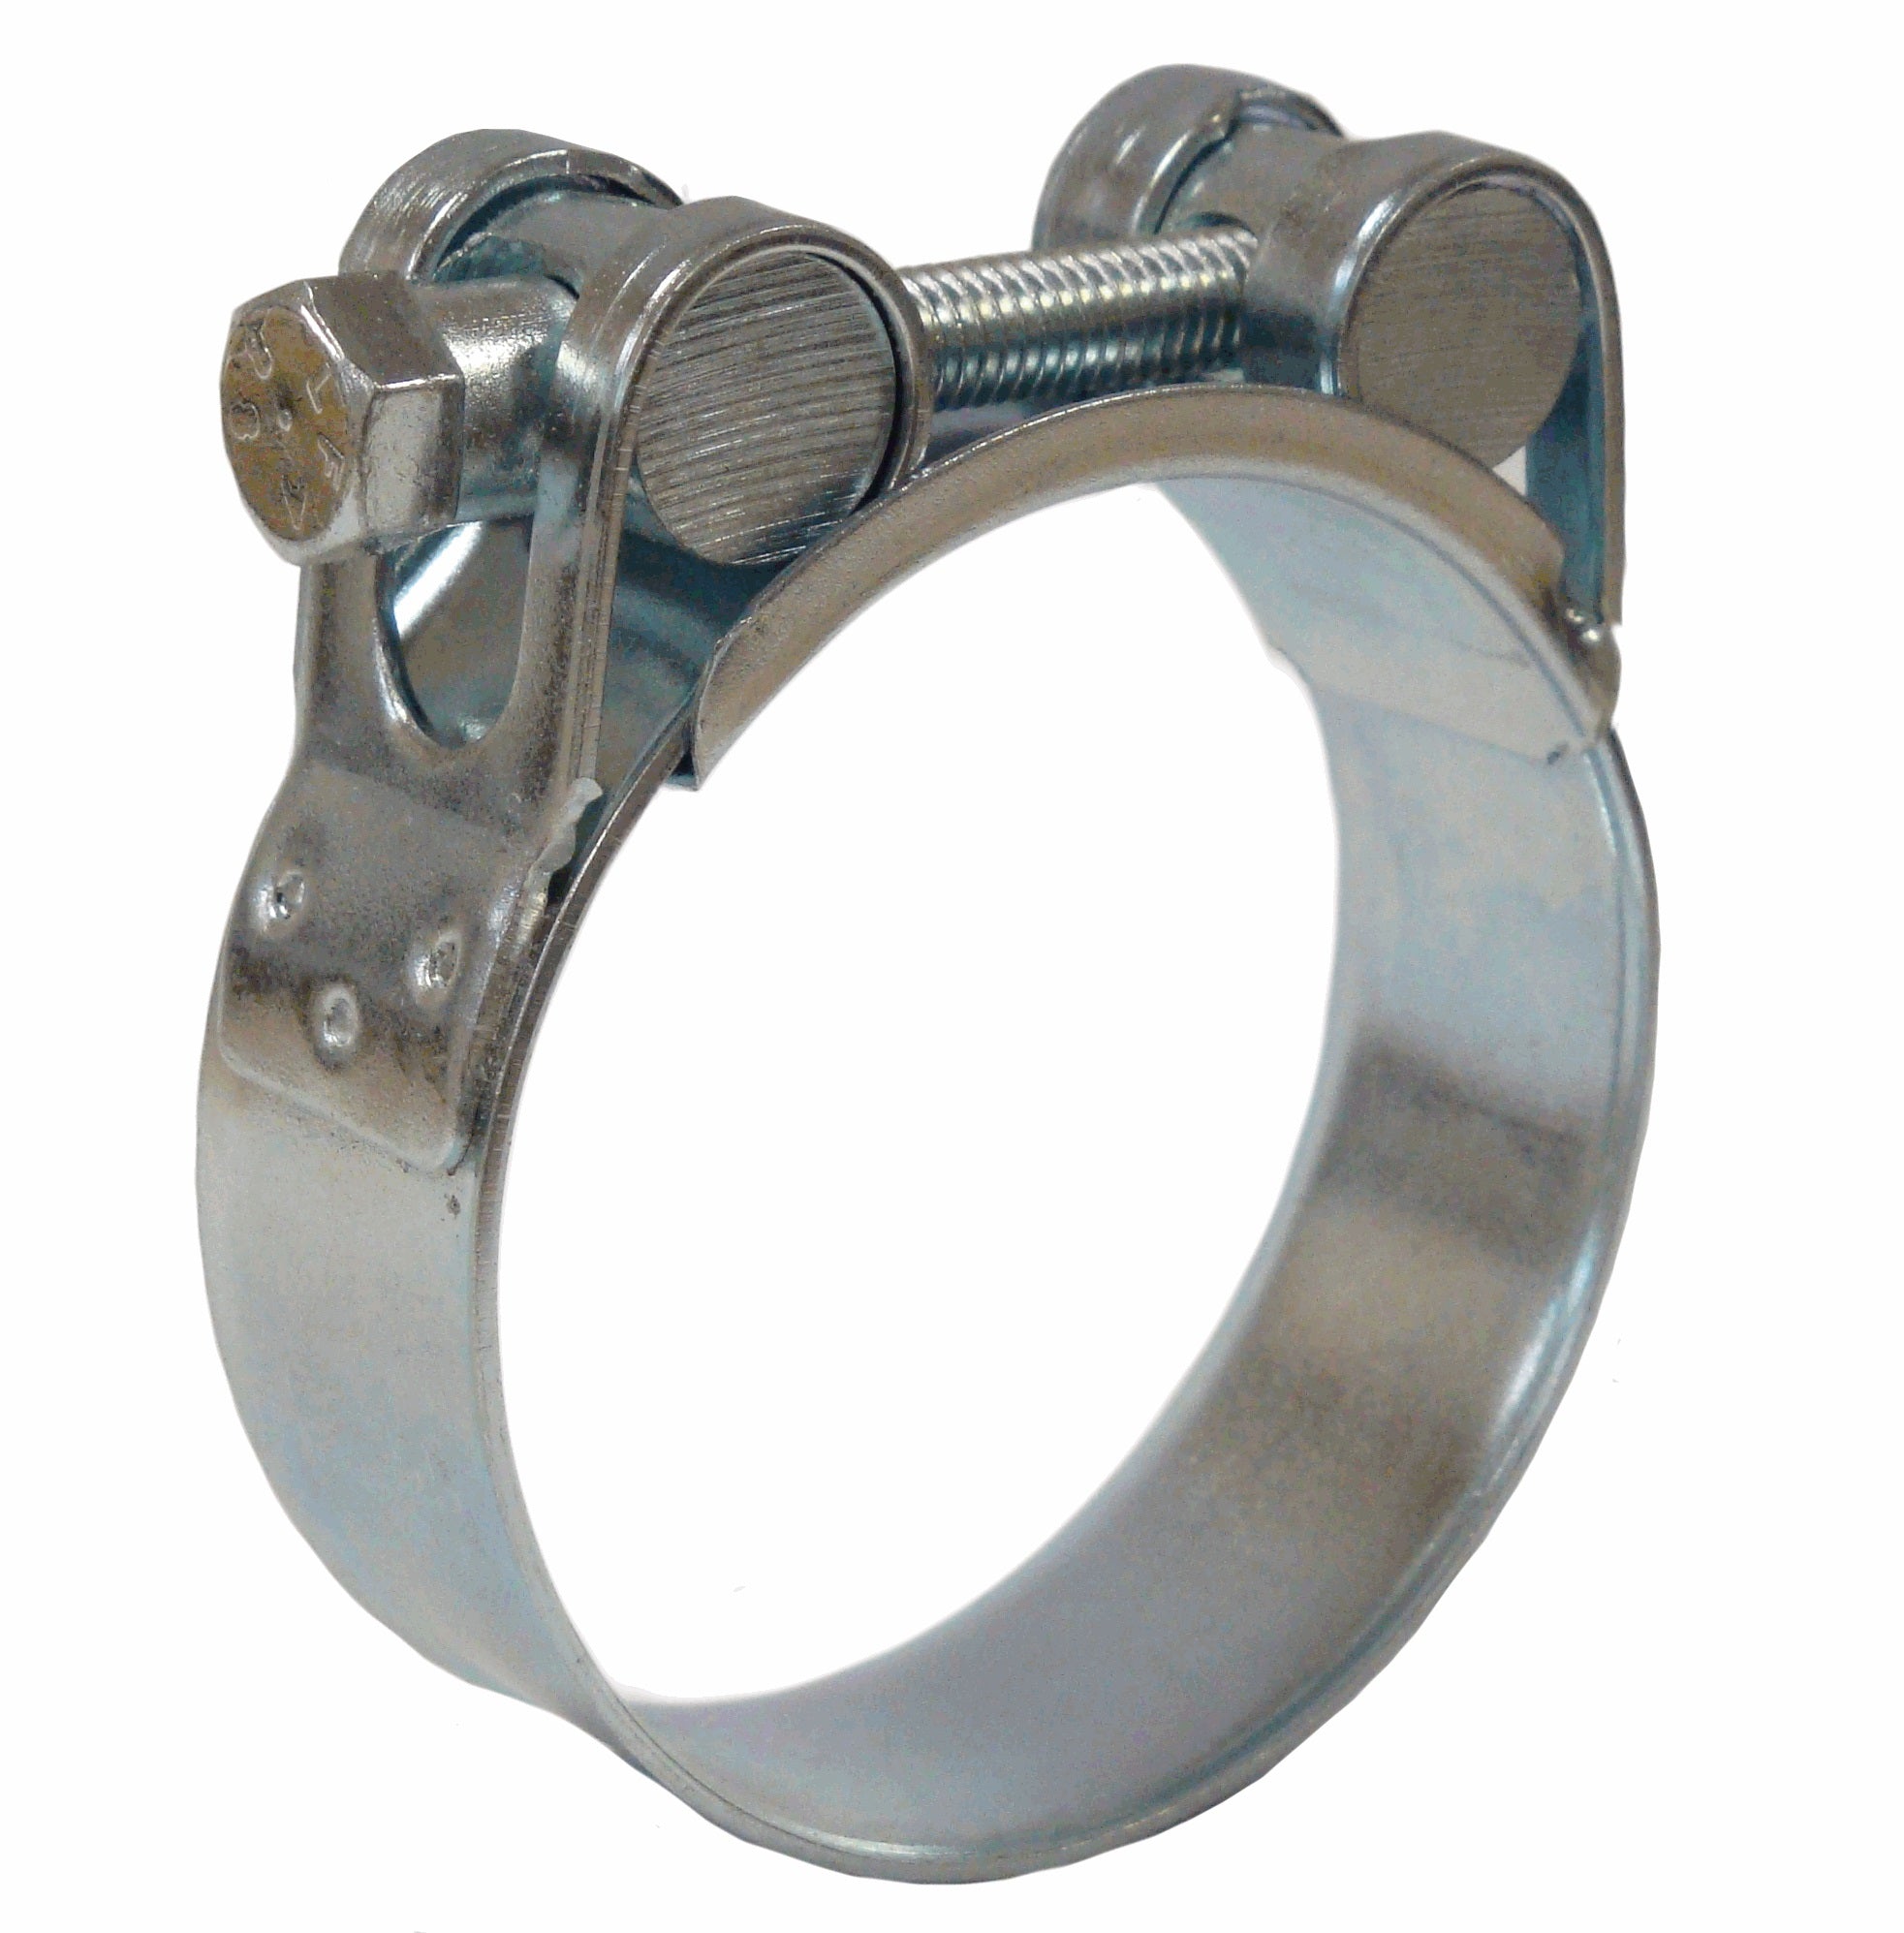 Jubilee® Superclamp 113-121mm 316 Stainless Steel